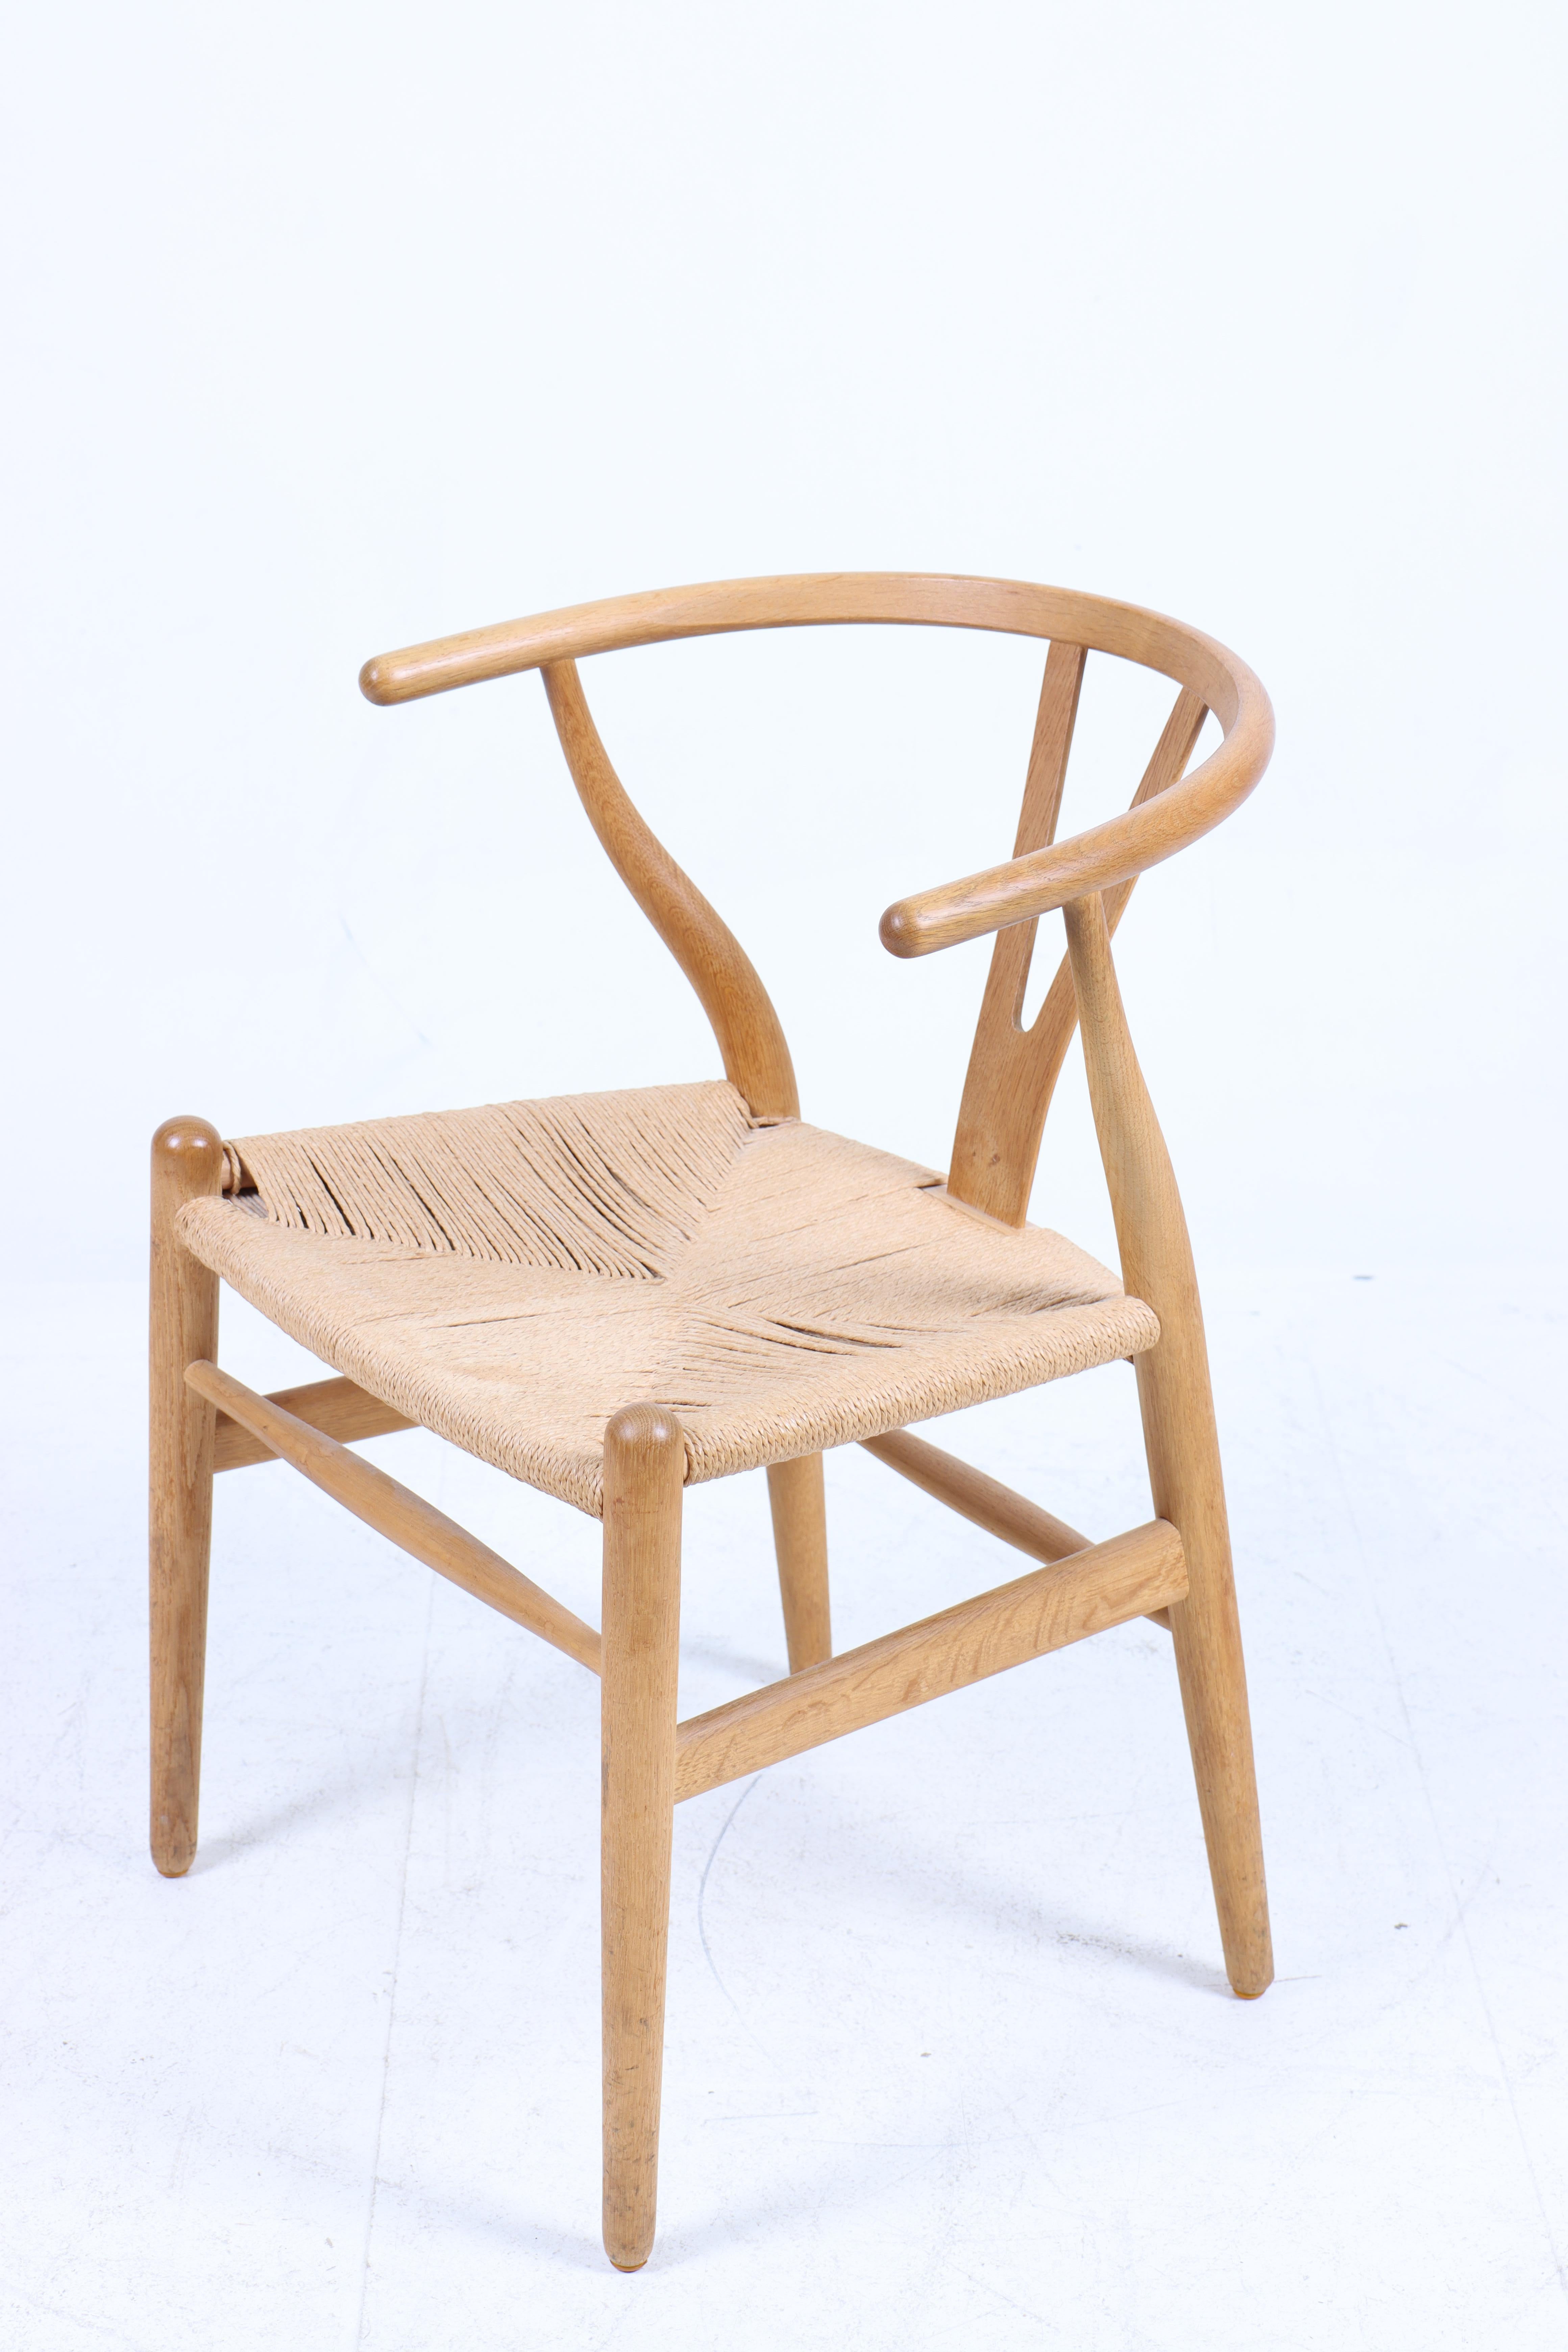 Danish Set of Four Midcentury Wishbone Chairs in Patinated Oak by Hans Wegner, 1960s For Sale